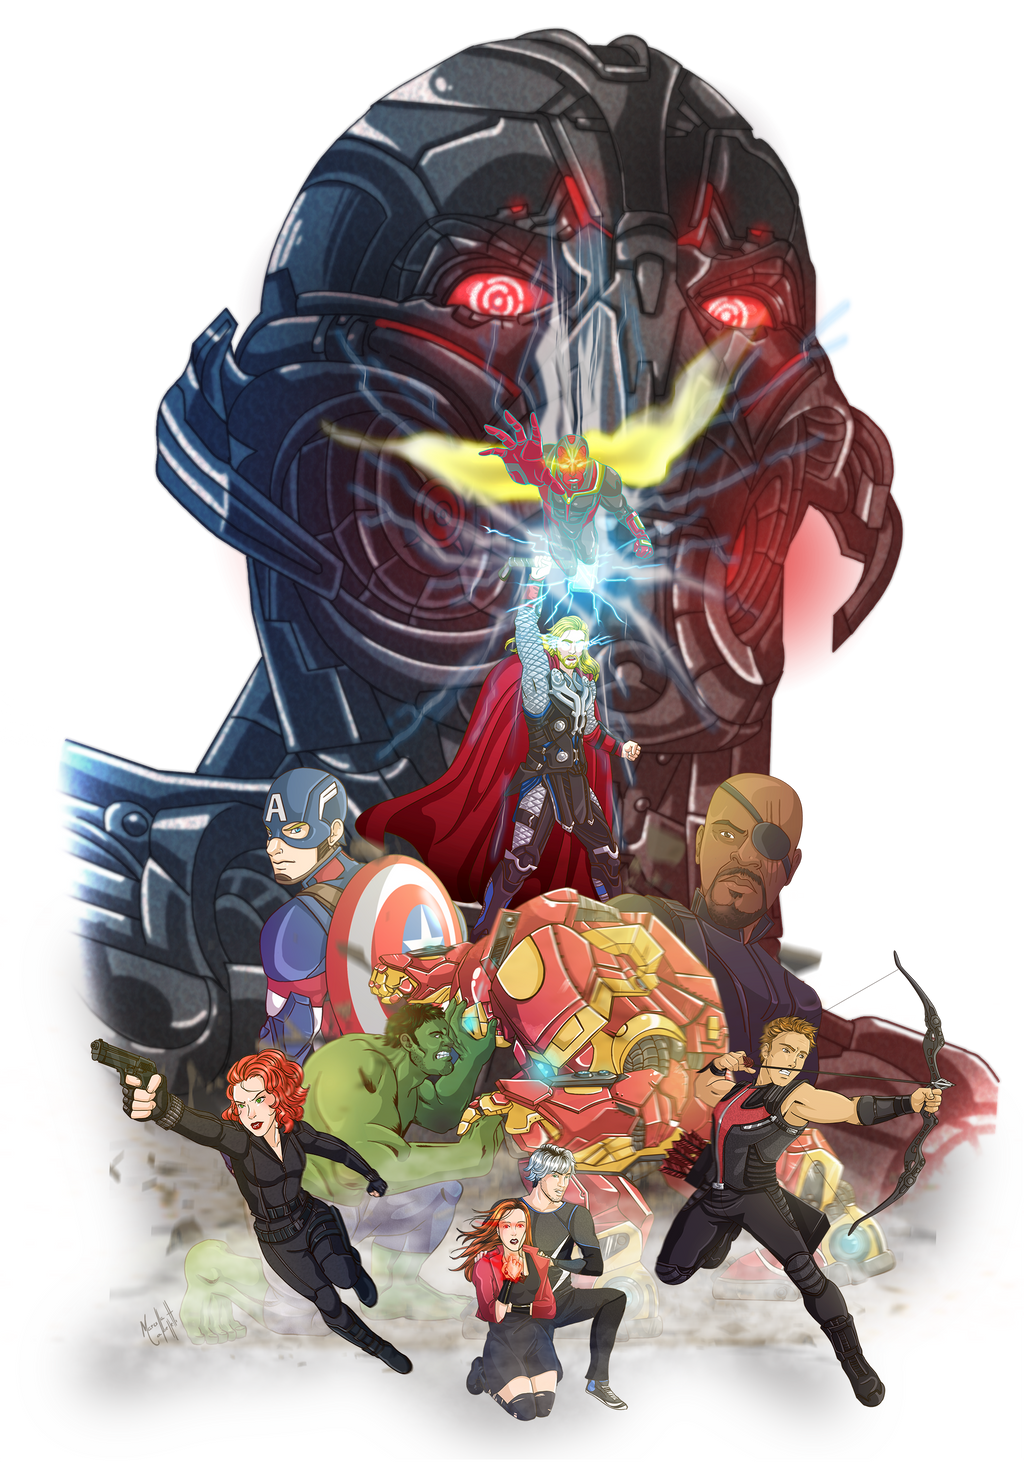 age_of_ultron_marvel_fanart_contest_by_fufunha-d8sjsar